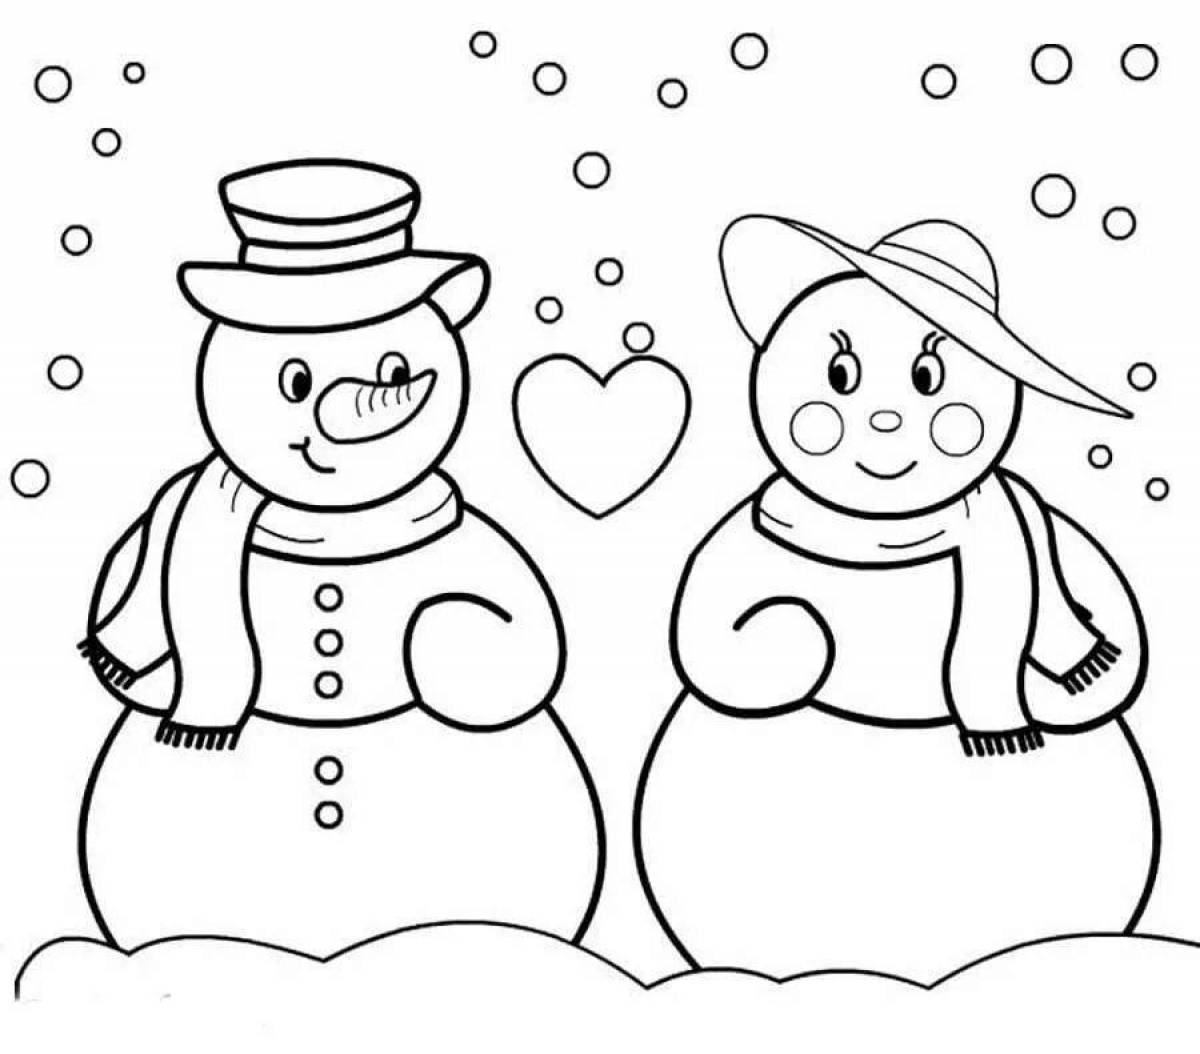 Colourful snowman coloring book